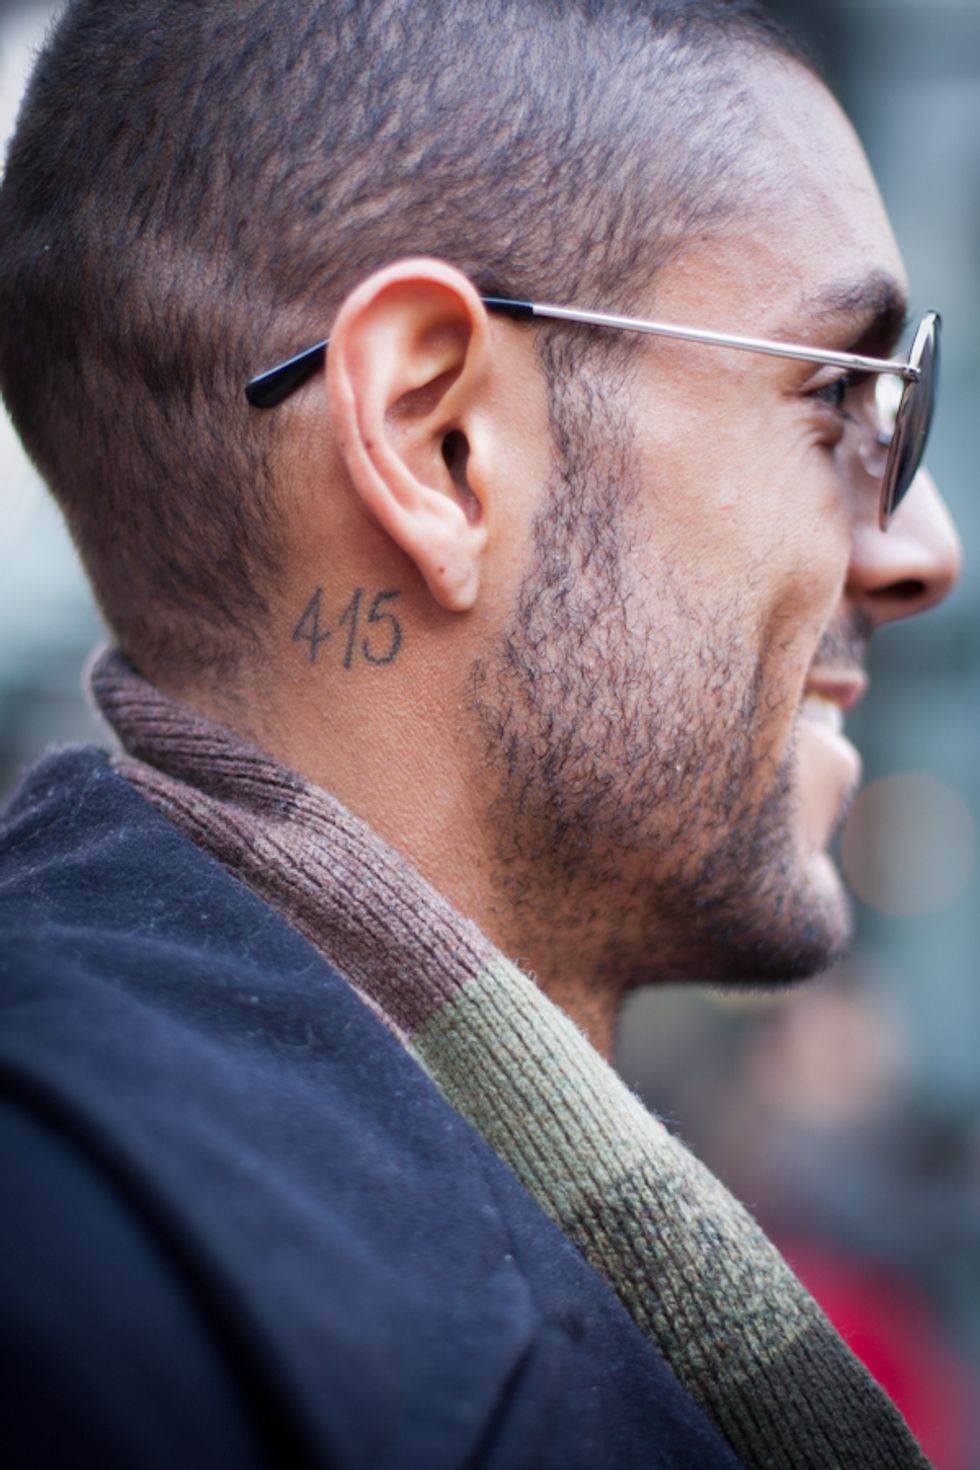 SF Street Style: 415 Tattoo + Grey Dr. Martens in Union Square